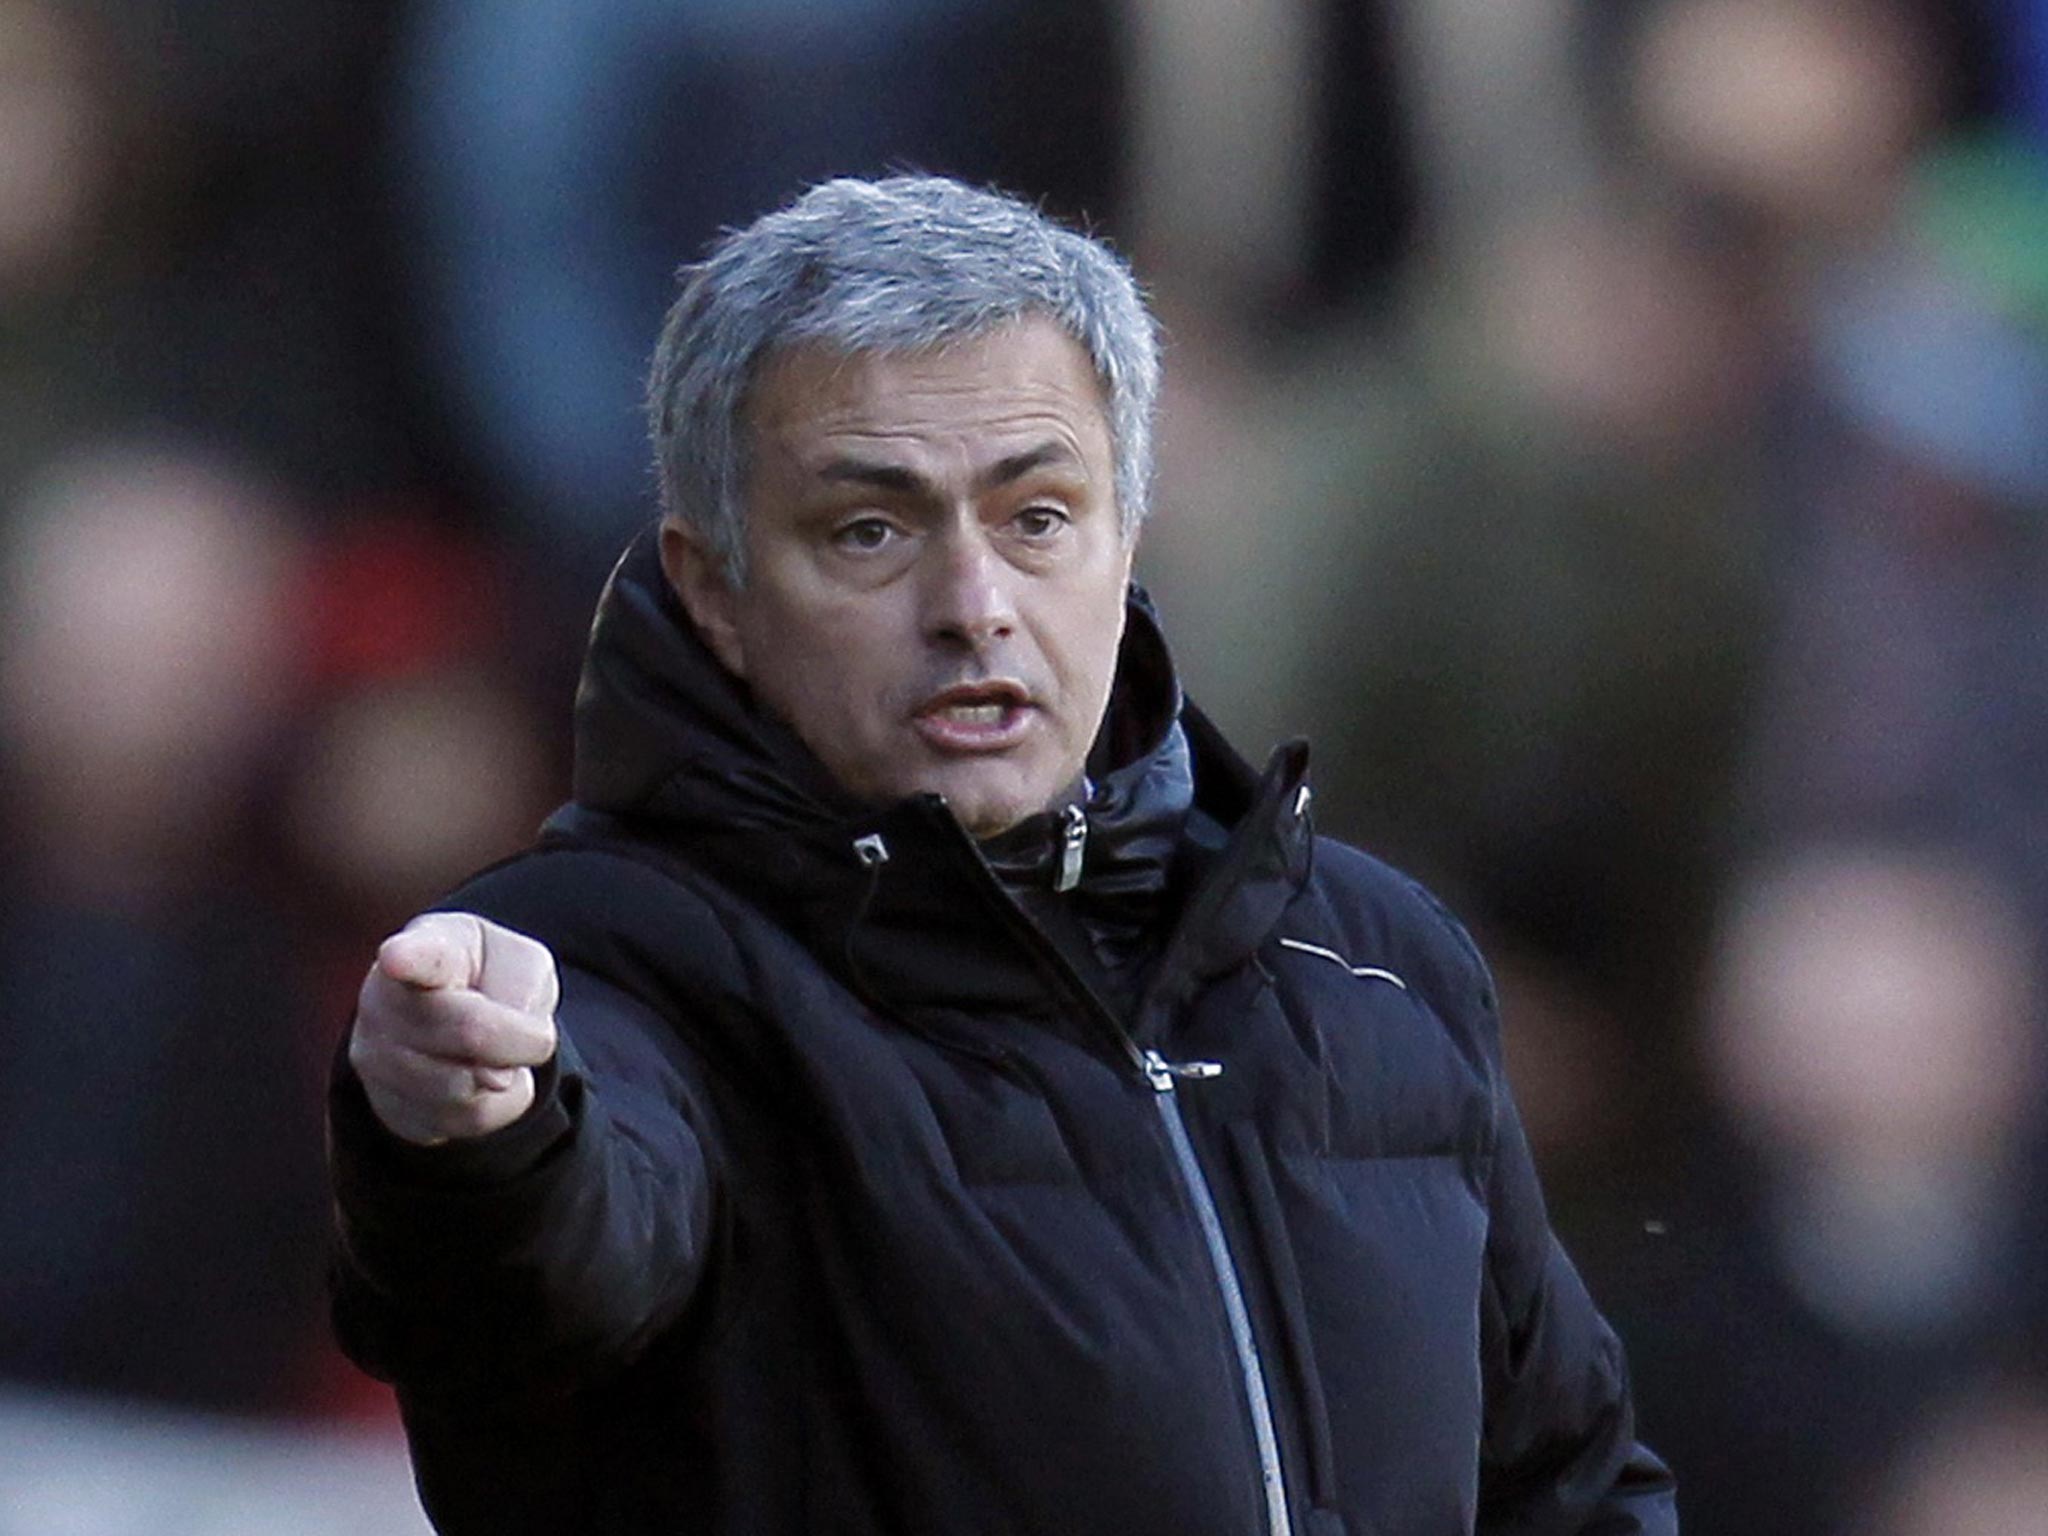 Jose Mourinho makes a point from the touchline